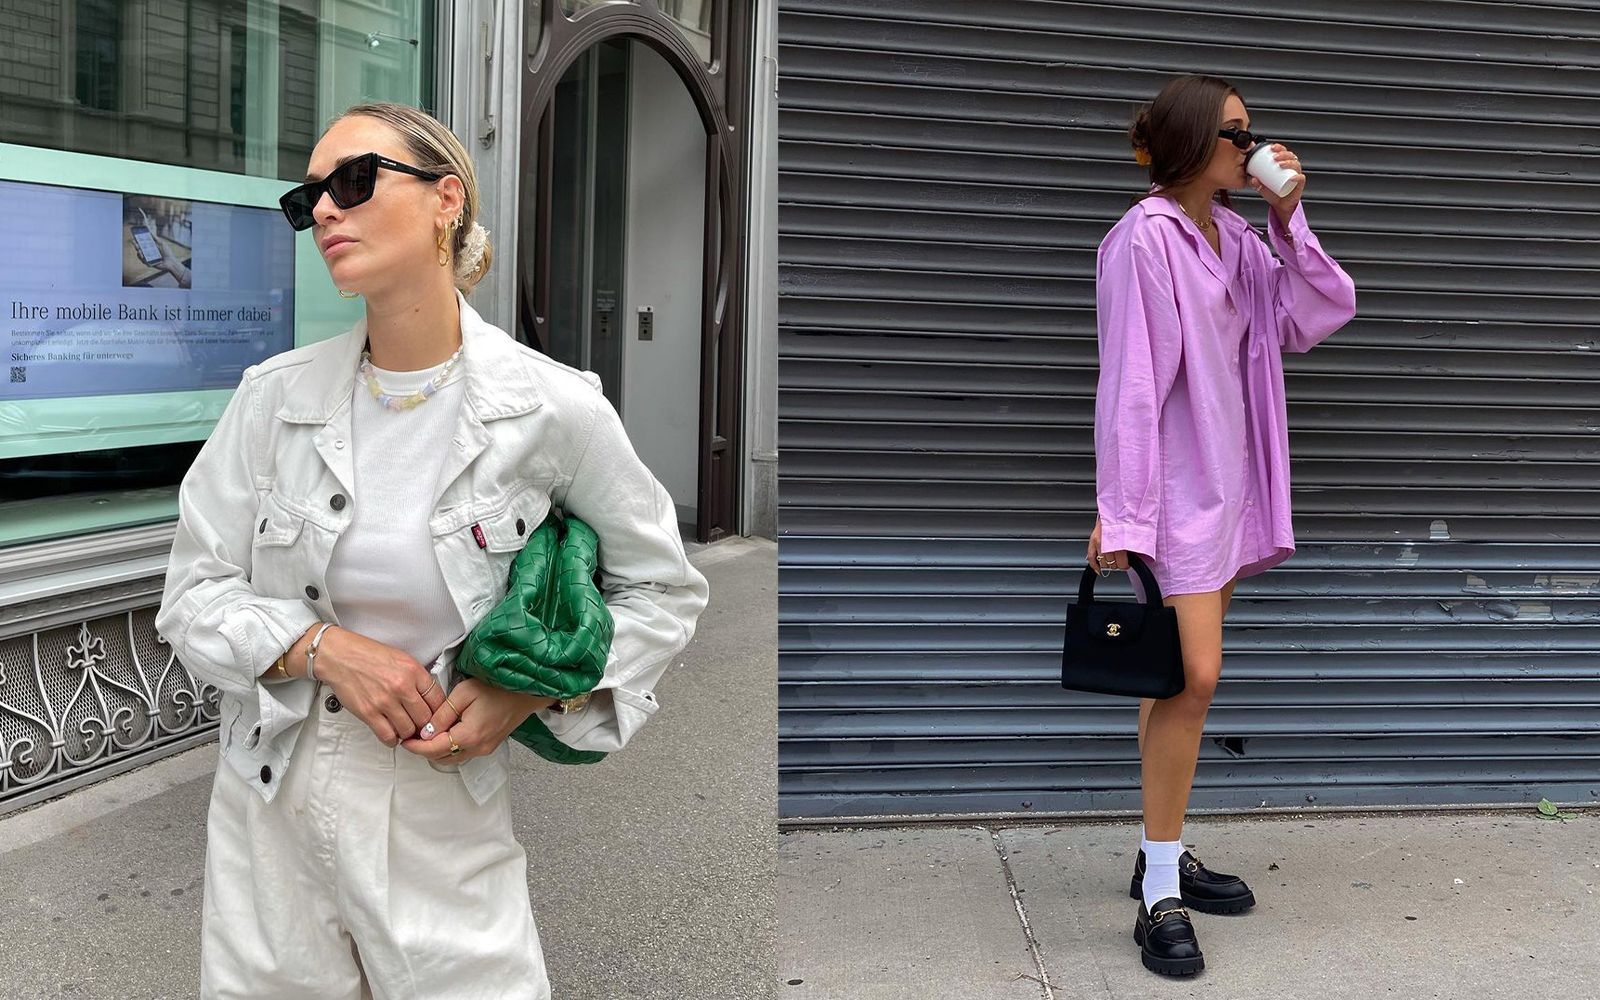 All the iconic vintage bags we wanna steal from Chiara